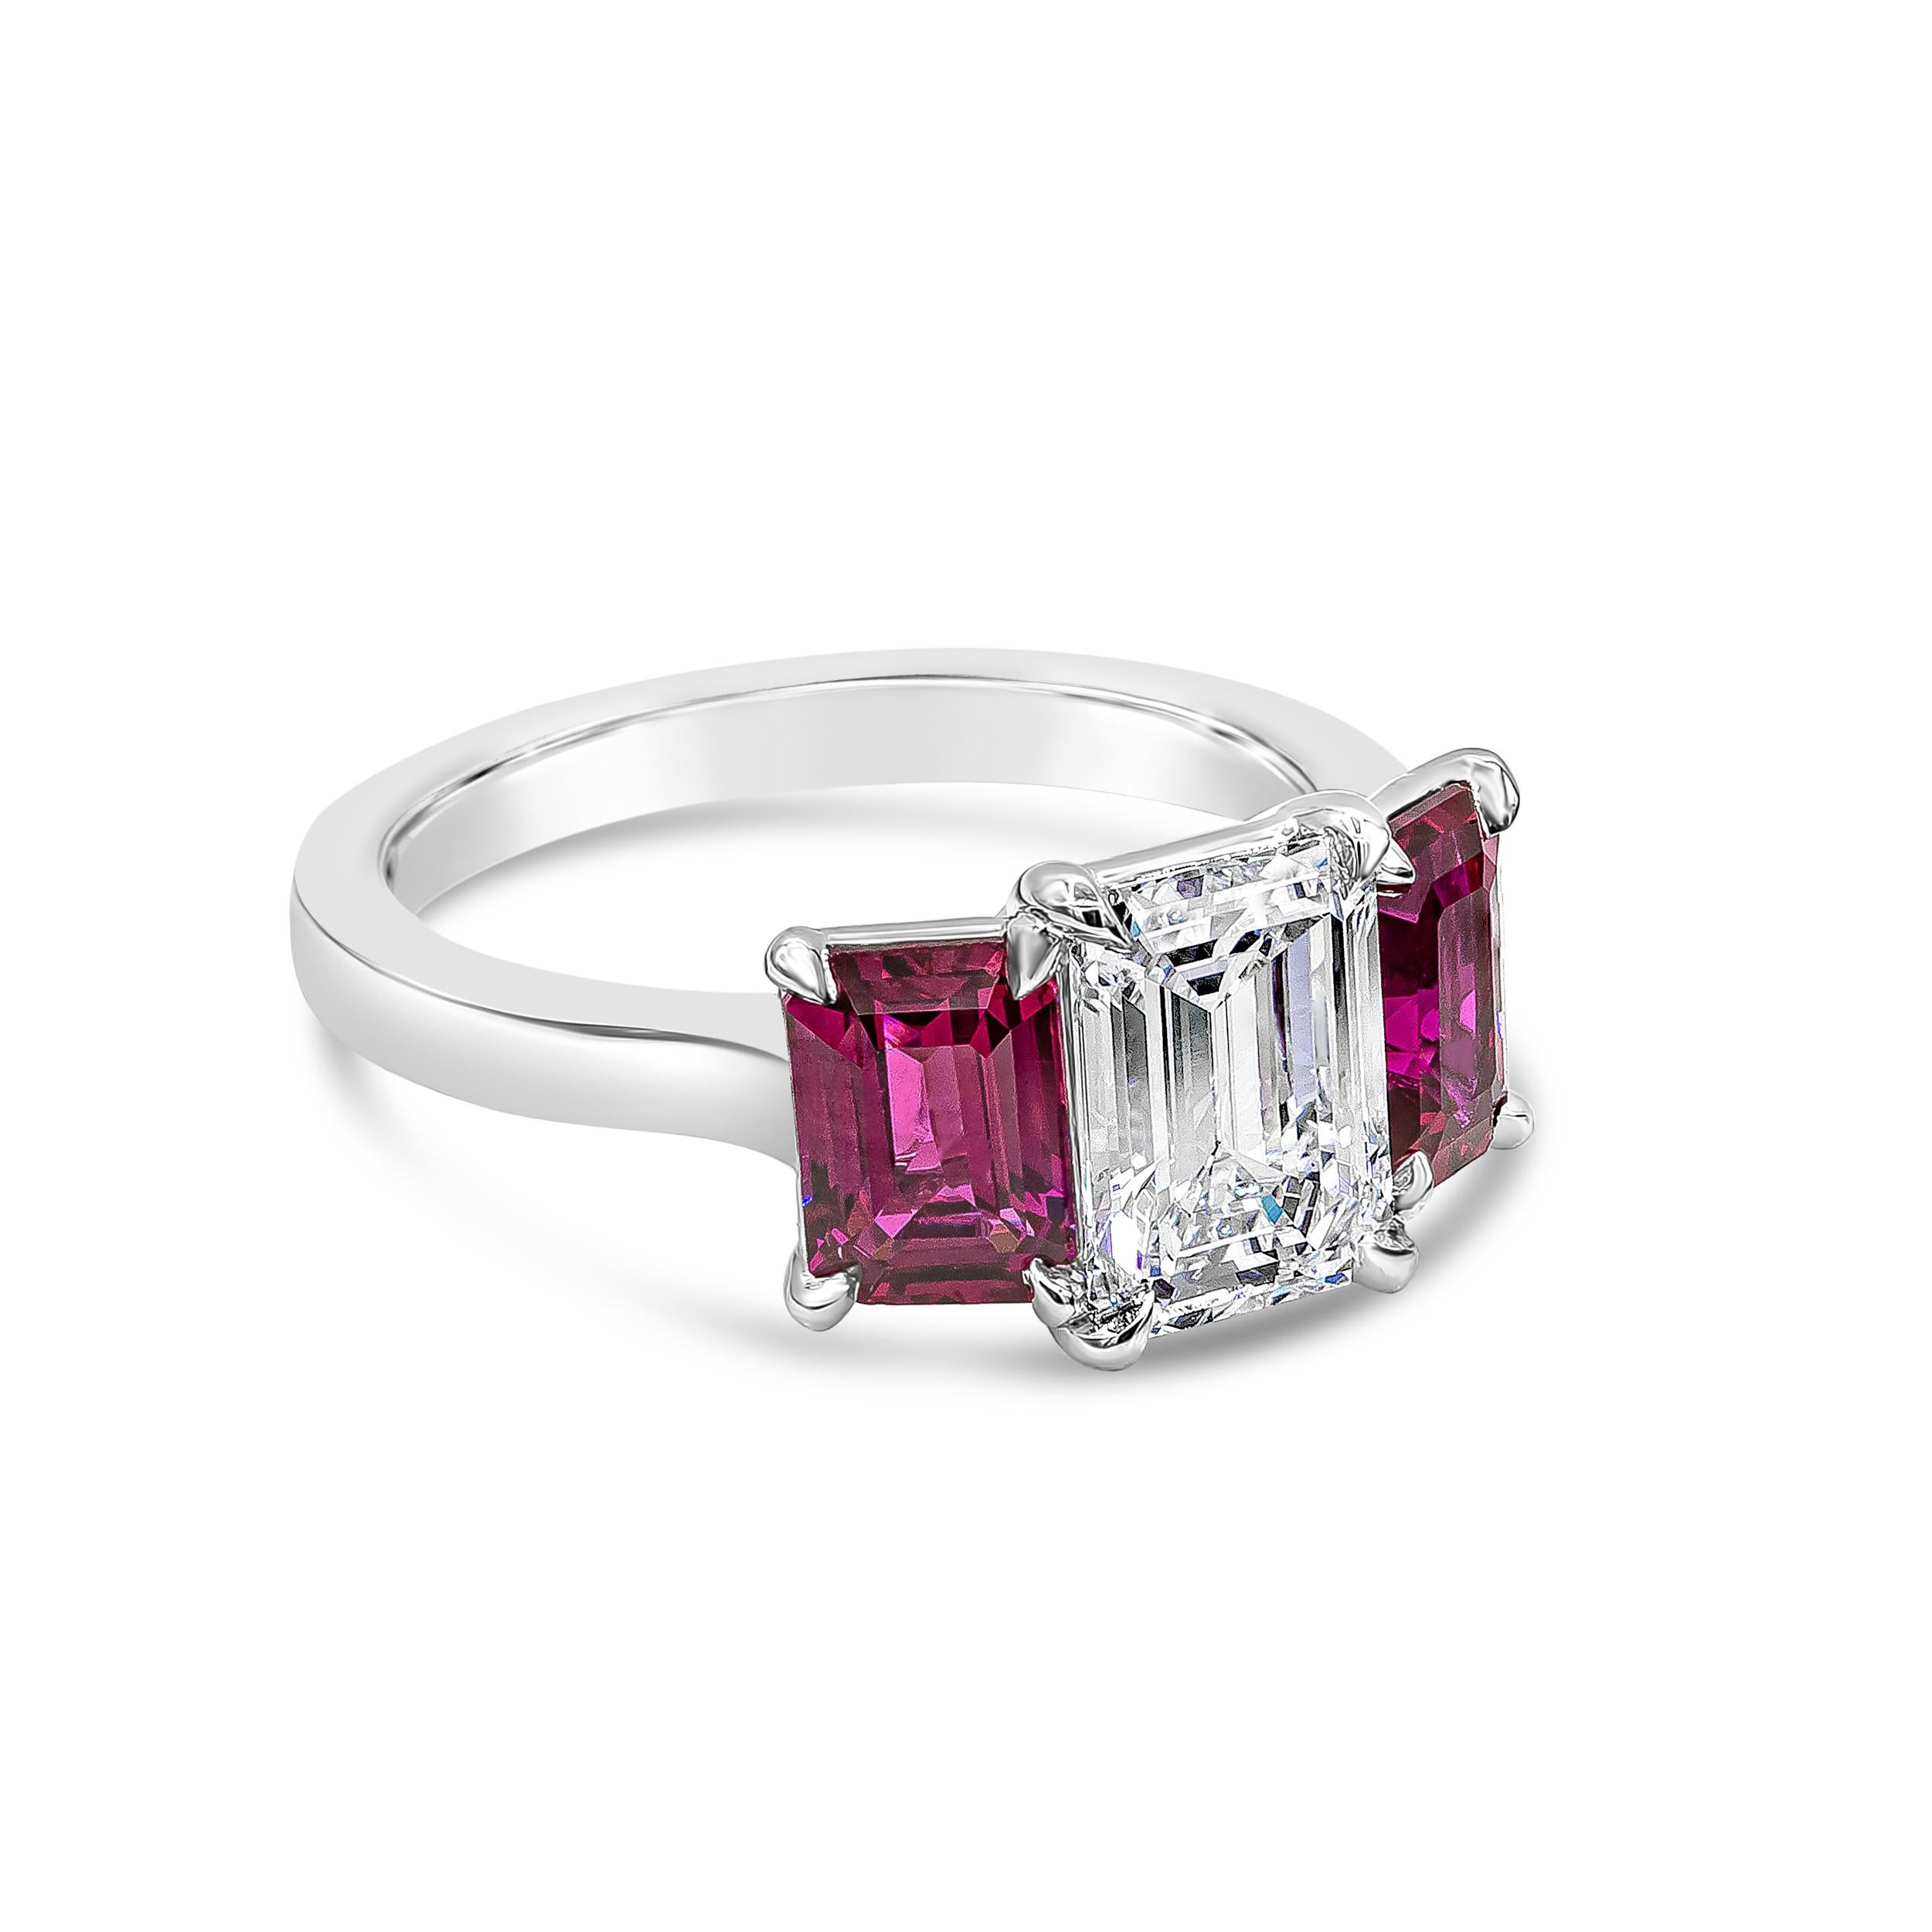 A gorgeous piece of jewelry showcasing a 1.62 carats emerald cut diamond certified by GIA as E color and VVS1 in clarity. Flanking the center diamond are two color-rich emerald cut rubies weighing 2.12 carats total, certified by GIA as Red color, NO